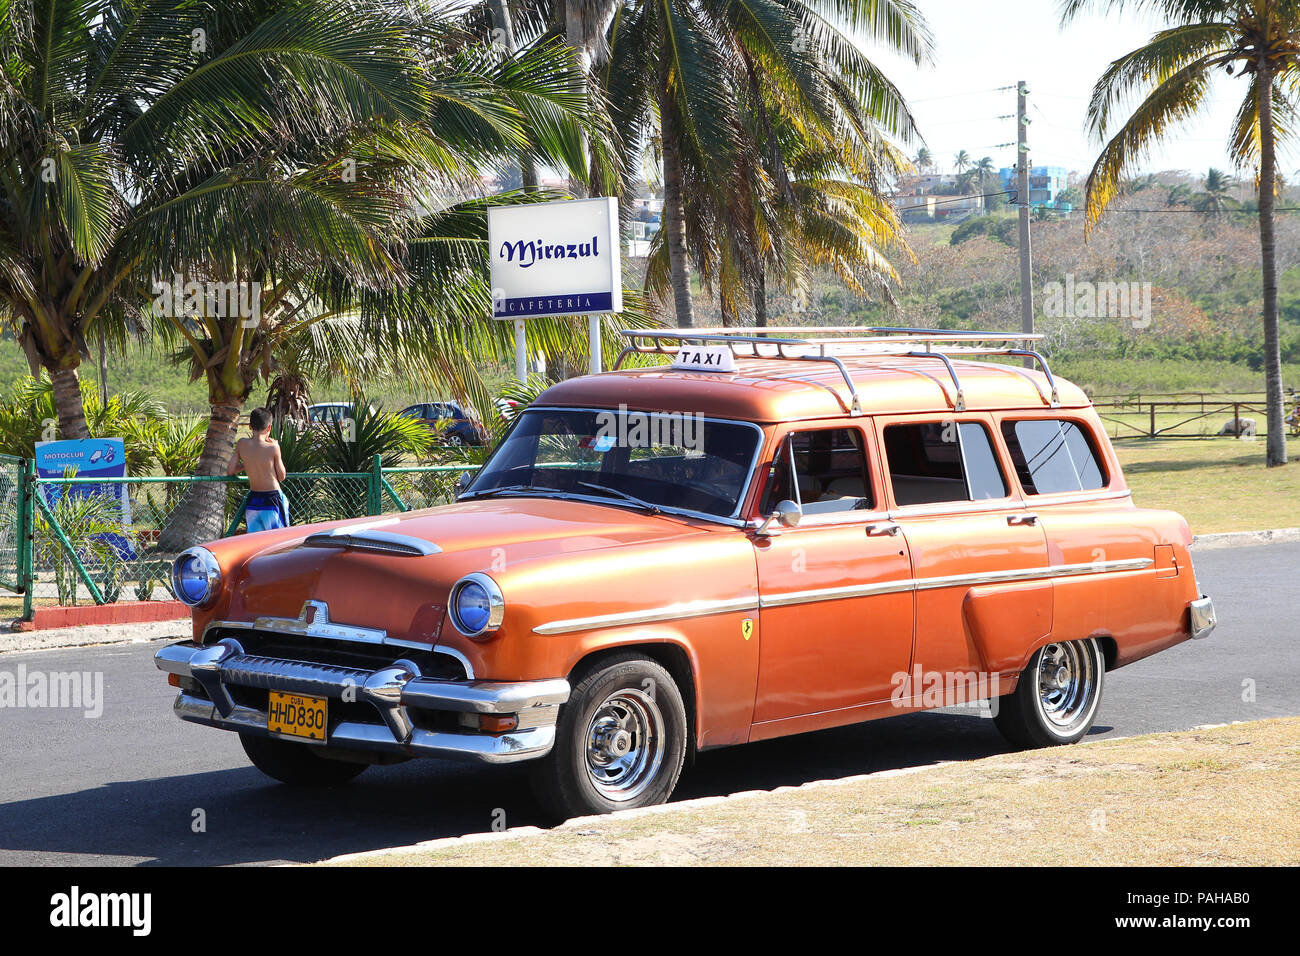 HAVANA - FEBRUARY 25: Classic American Mercury car on February 25, 2011 in Havana. Recent change in law allows the Cubans to trade cars again. Old law Stock Photo